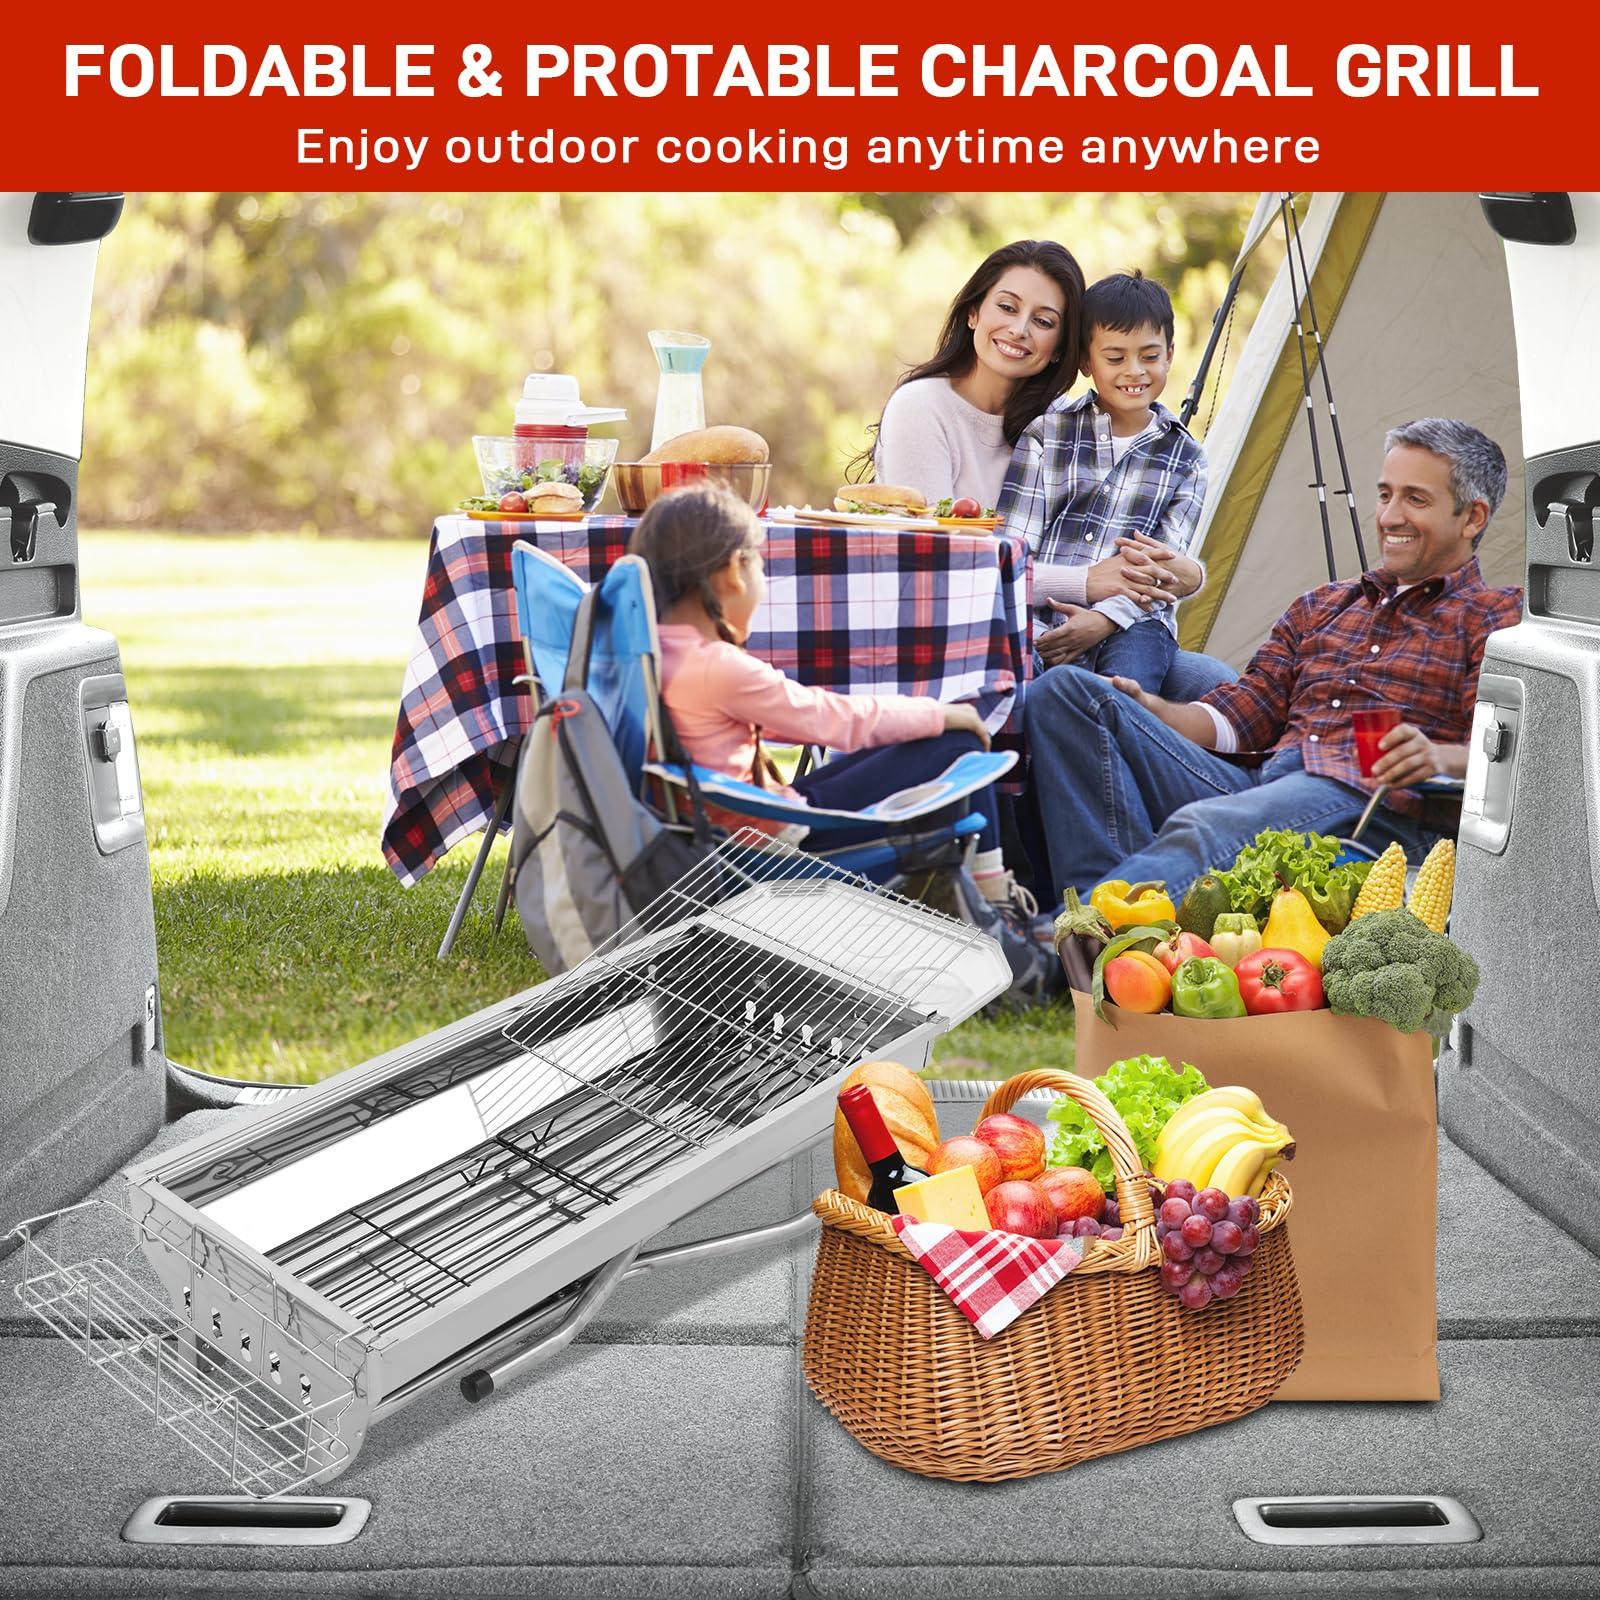 Outvita Portable Charcoal Grill, 39 x 12x 28" Foldable Barbecue Grill, Stainless Steel BBQ Grill for Outdoor Cooking Camping Hiking Picnic Garden Beach Party(Large) - CookCave